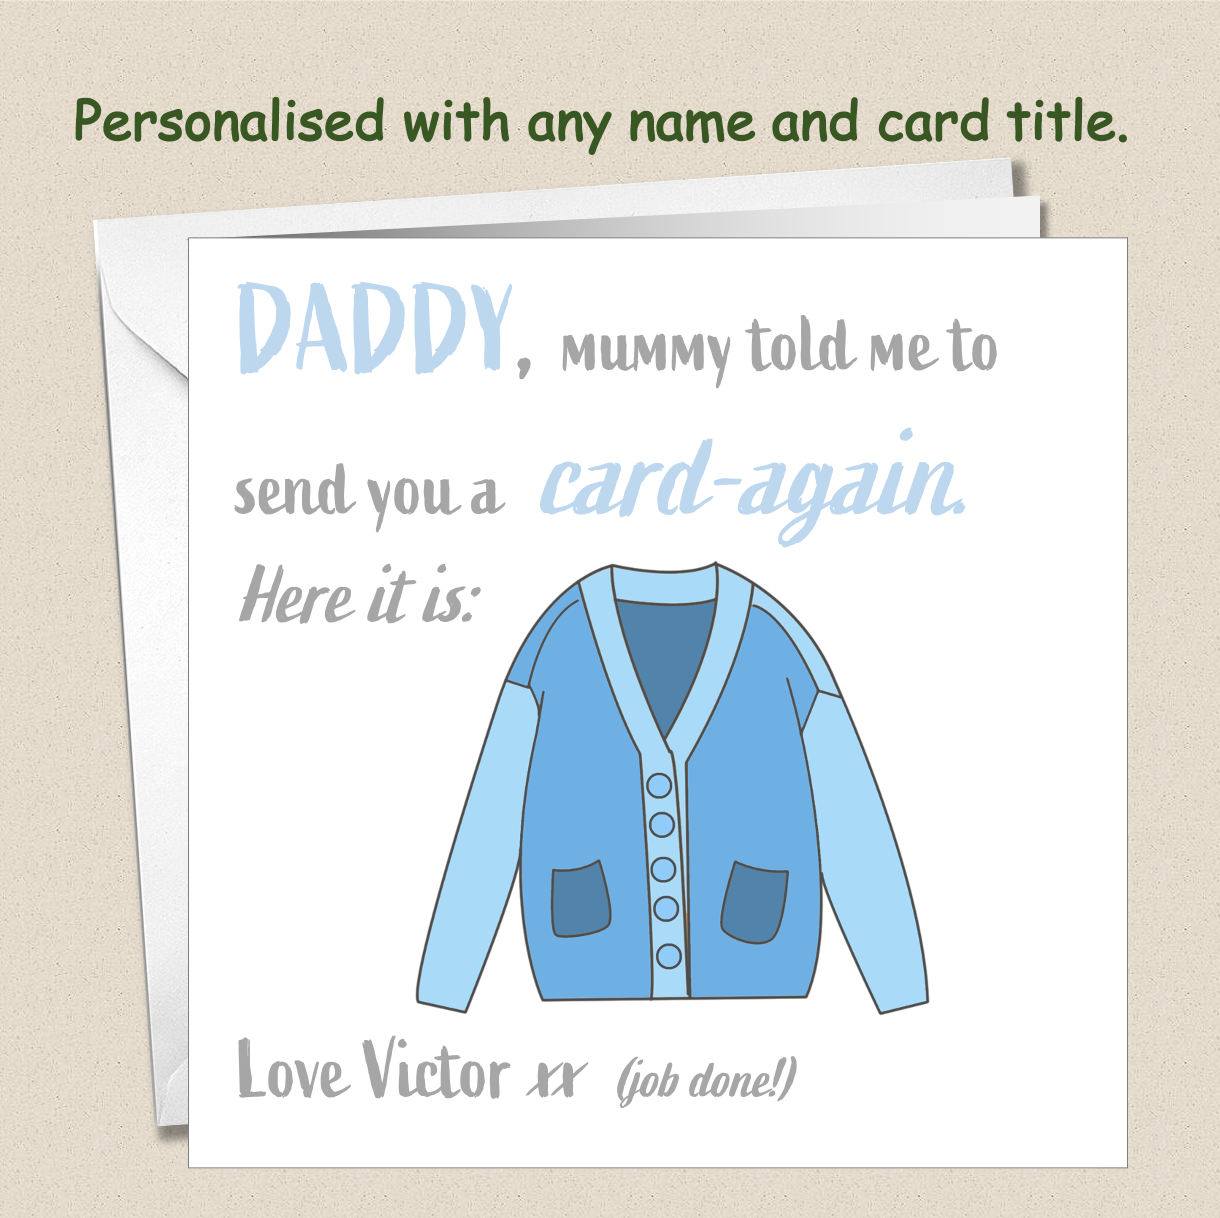 Personalised Father's Day Card - Card-again